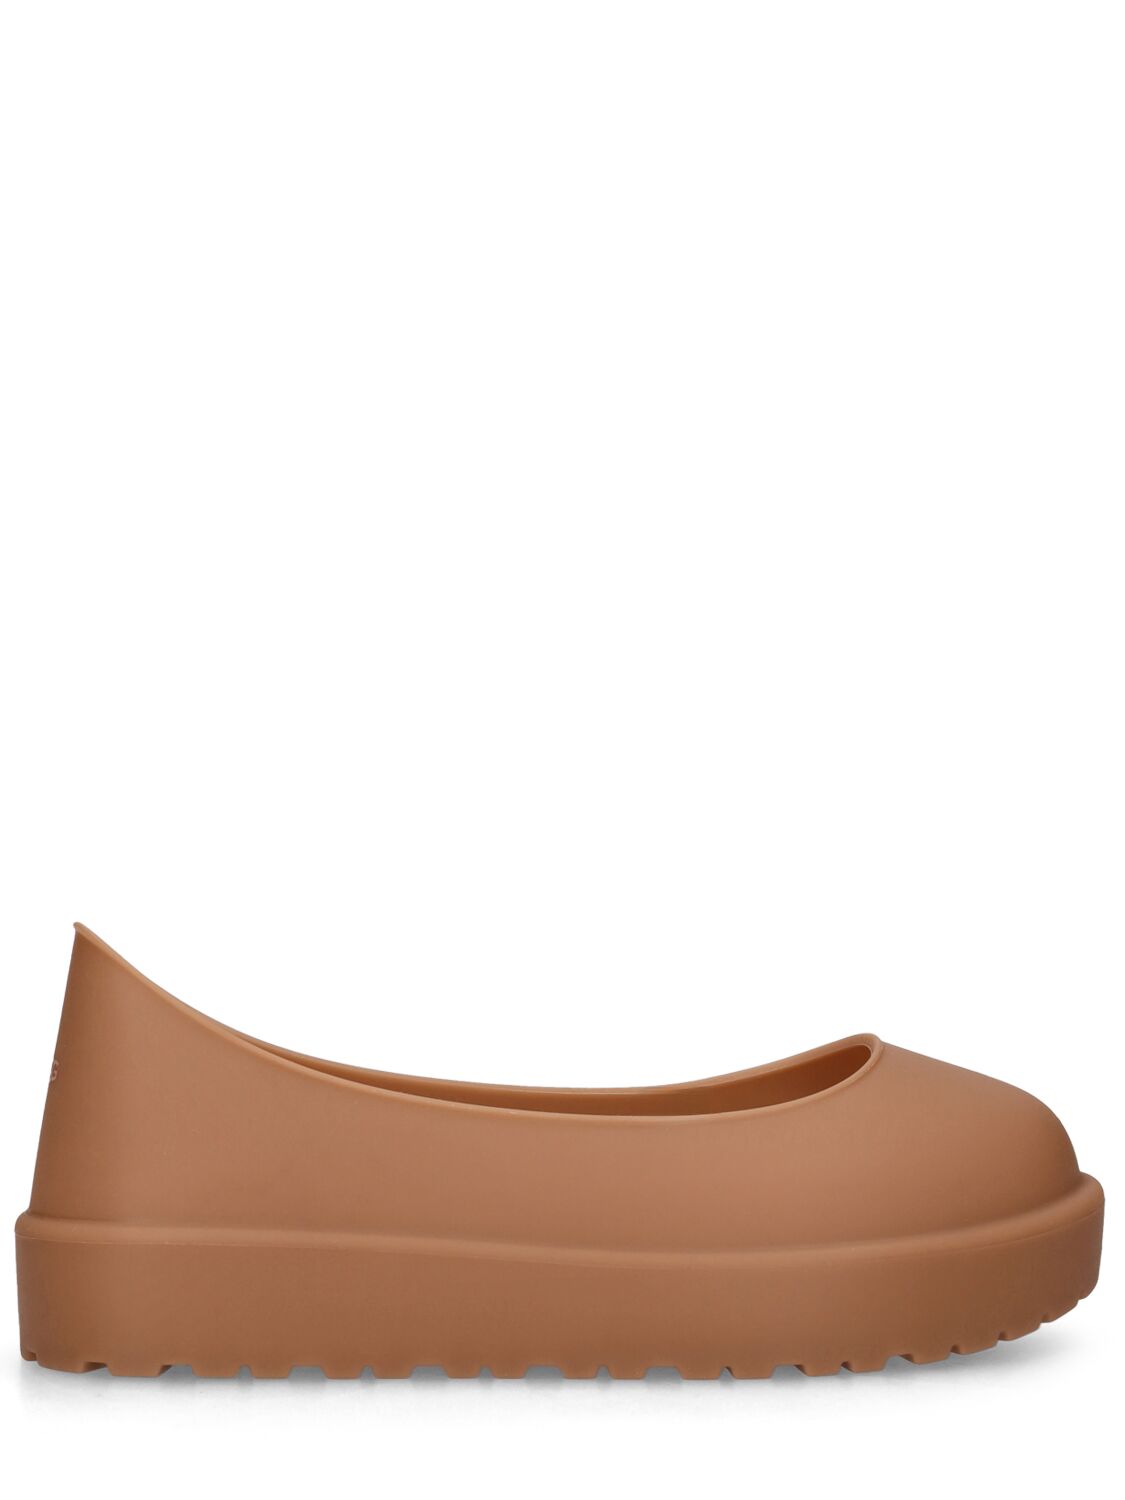 Rubber Ugg Guard